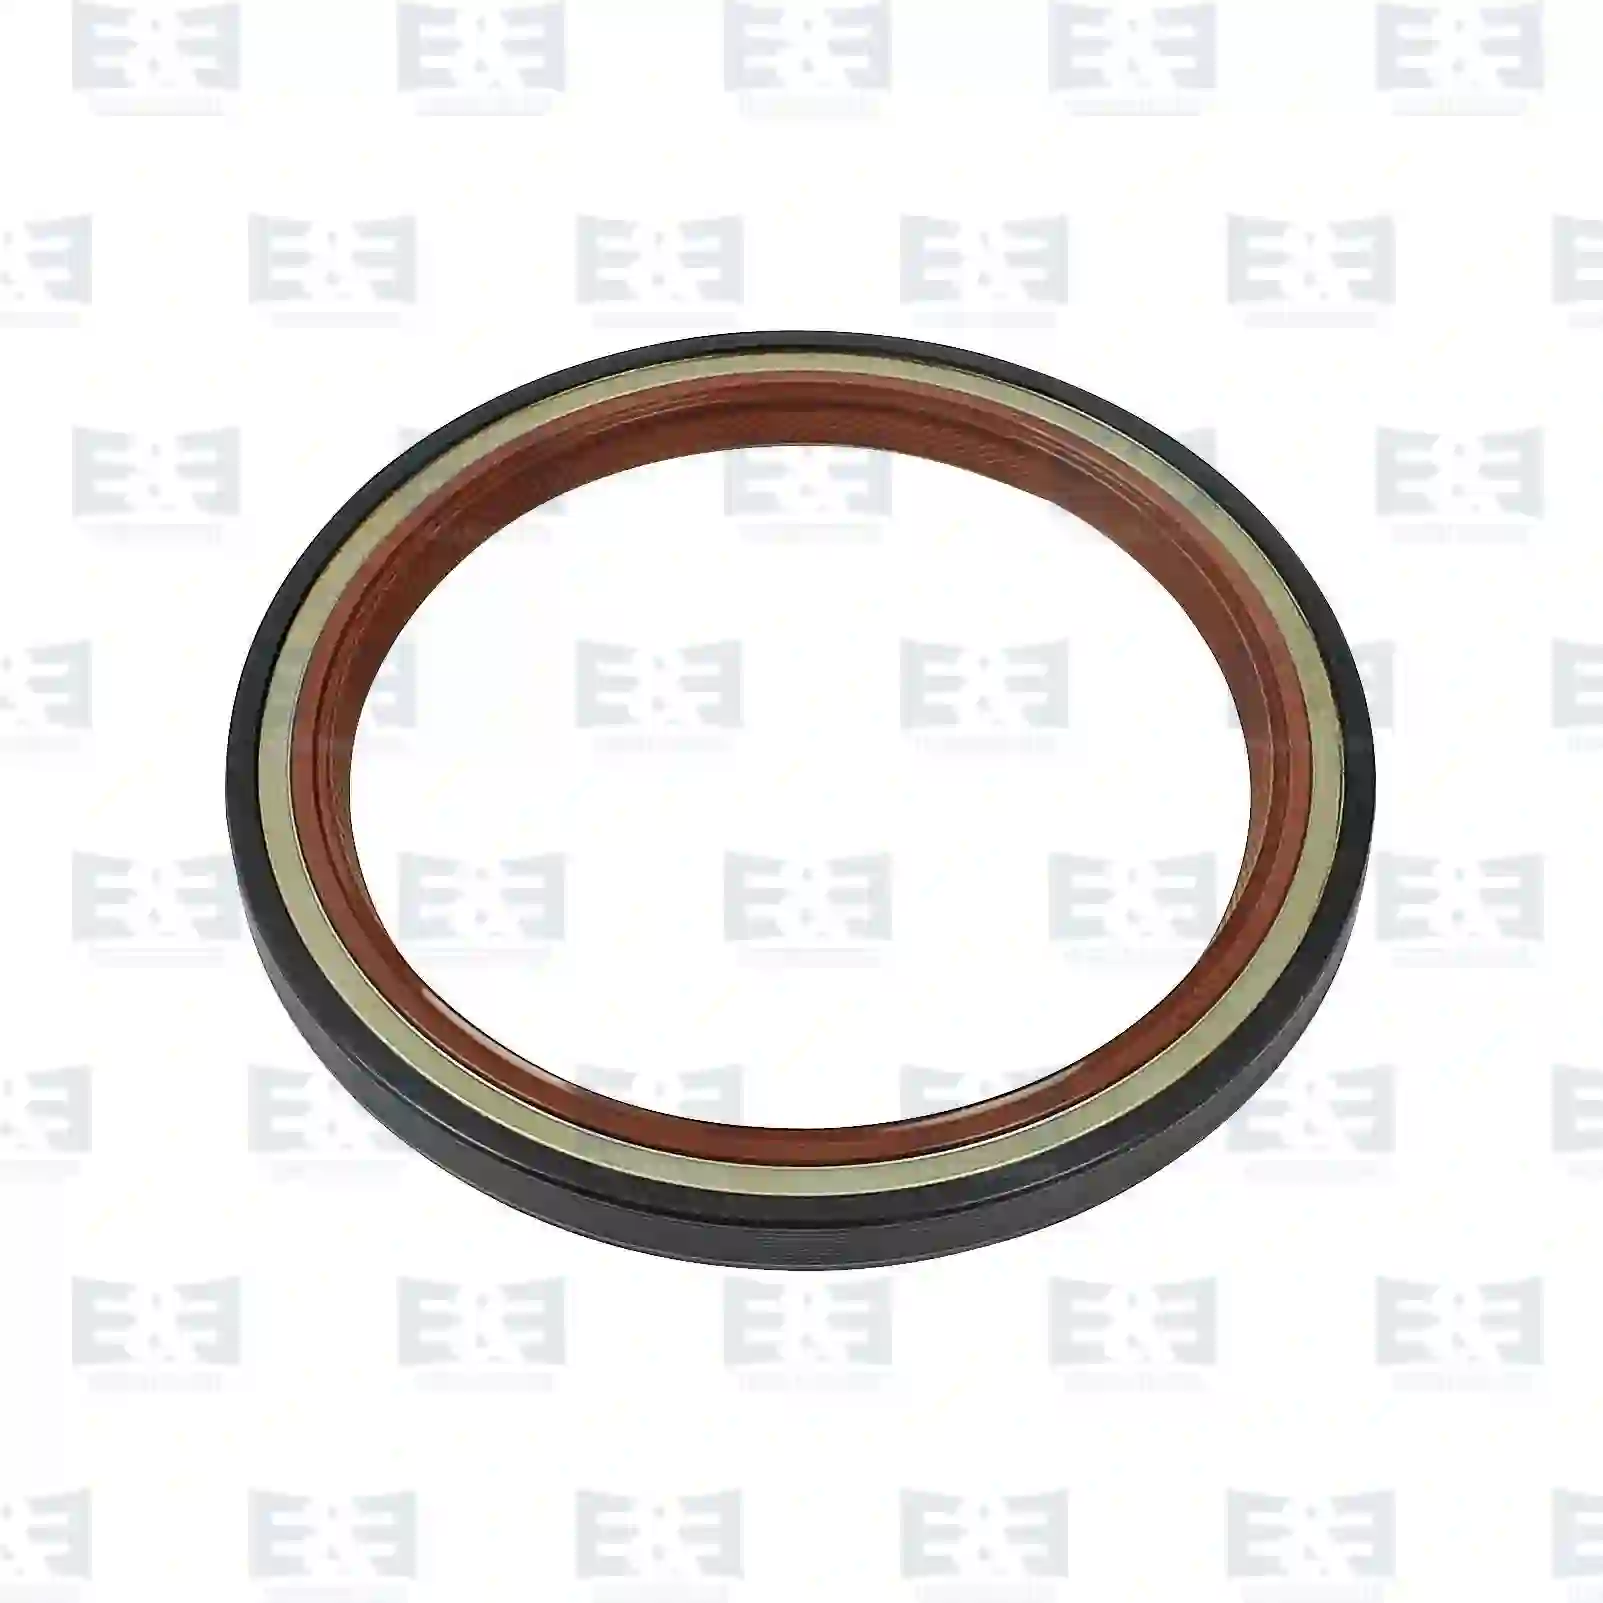 Oil seal, 2E2200294, 55229956, 9653528580, 079103051F, 11117568263, 11117805946, 96521516, 012743, 012749, 051440, 051474, 0514A2, 55229956, 9400127499, 9653528580, 1142360, 9653528580, Y40111312, Y60111312, 11117568263, 11117805946, M287542, 12279-6F900, 12279-6F902, 12279-6F90A, 012743, 012749, 051440, 051474, 0514A2, 95510105300, 7700695940, 7703087190, OZB708511, 16121-73J00, SU001-00530, 079103051F ||  2E2200294 E&E Truck Spare Parts | Truck Spare Parts, Auotomotive Spare Parts Oil seal, 2E2200294, 55229956, 9653528580, 079103051F, 11117568263, 11117805946, 96521516, 012743, 012749, 051440, 051474, 0514A2, 55229956, 9400127499, 9653528580, 1142360, 9653528580, Y40111312, Y60111312, 11117568263, 11117805946, M287542, 12279-6F900, 12279-6F902, 12279-6F90A, 012743, 012749, 051440, 051474, 0514A2, 95510105300, 7700695940, 7703087190, OZB708511, 16121-73J00, SU001-00530, 079103051F ||  2E2200294 E&E Truck Spare Parts | Truck Spare Parts, Auotomotive Spare Parts